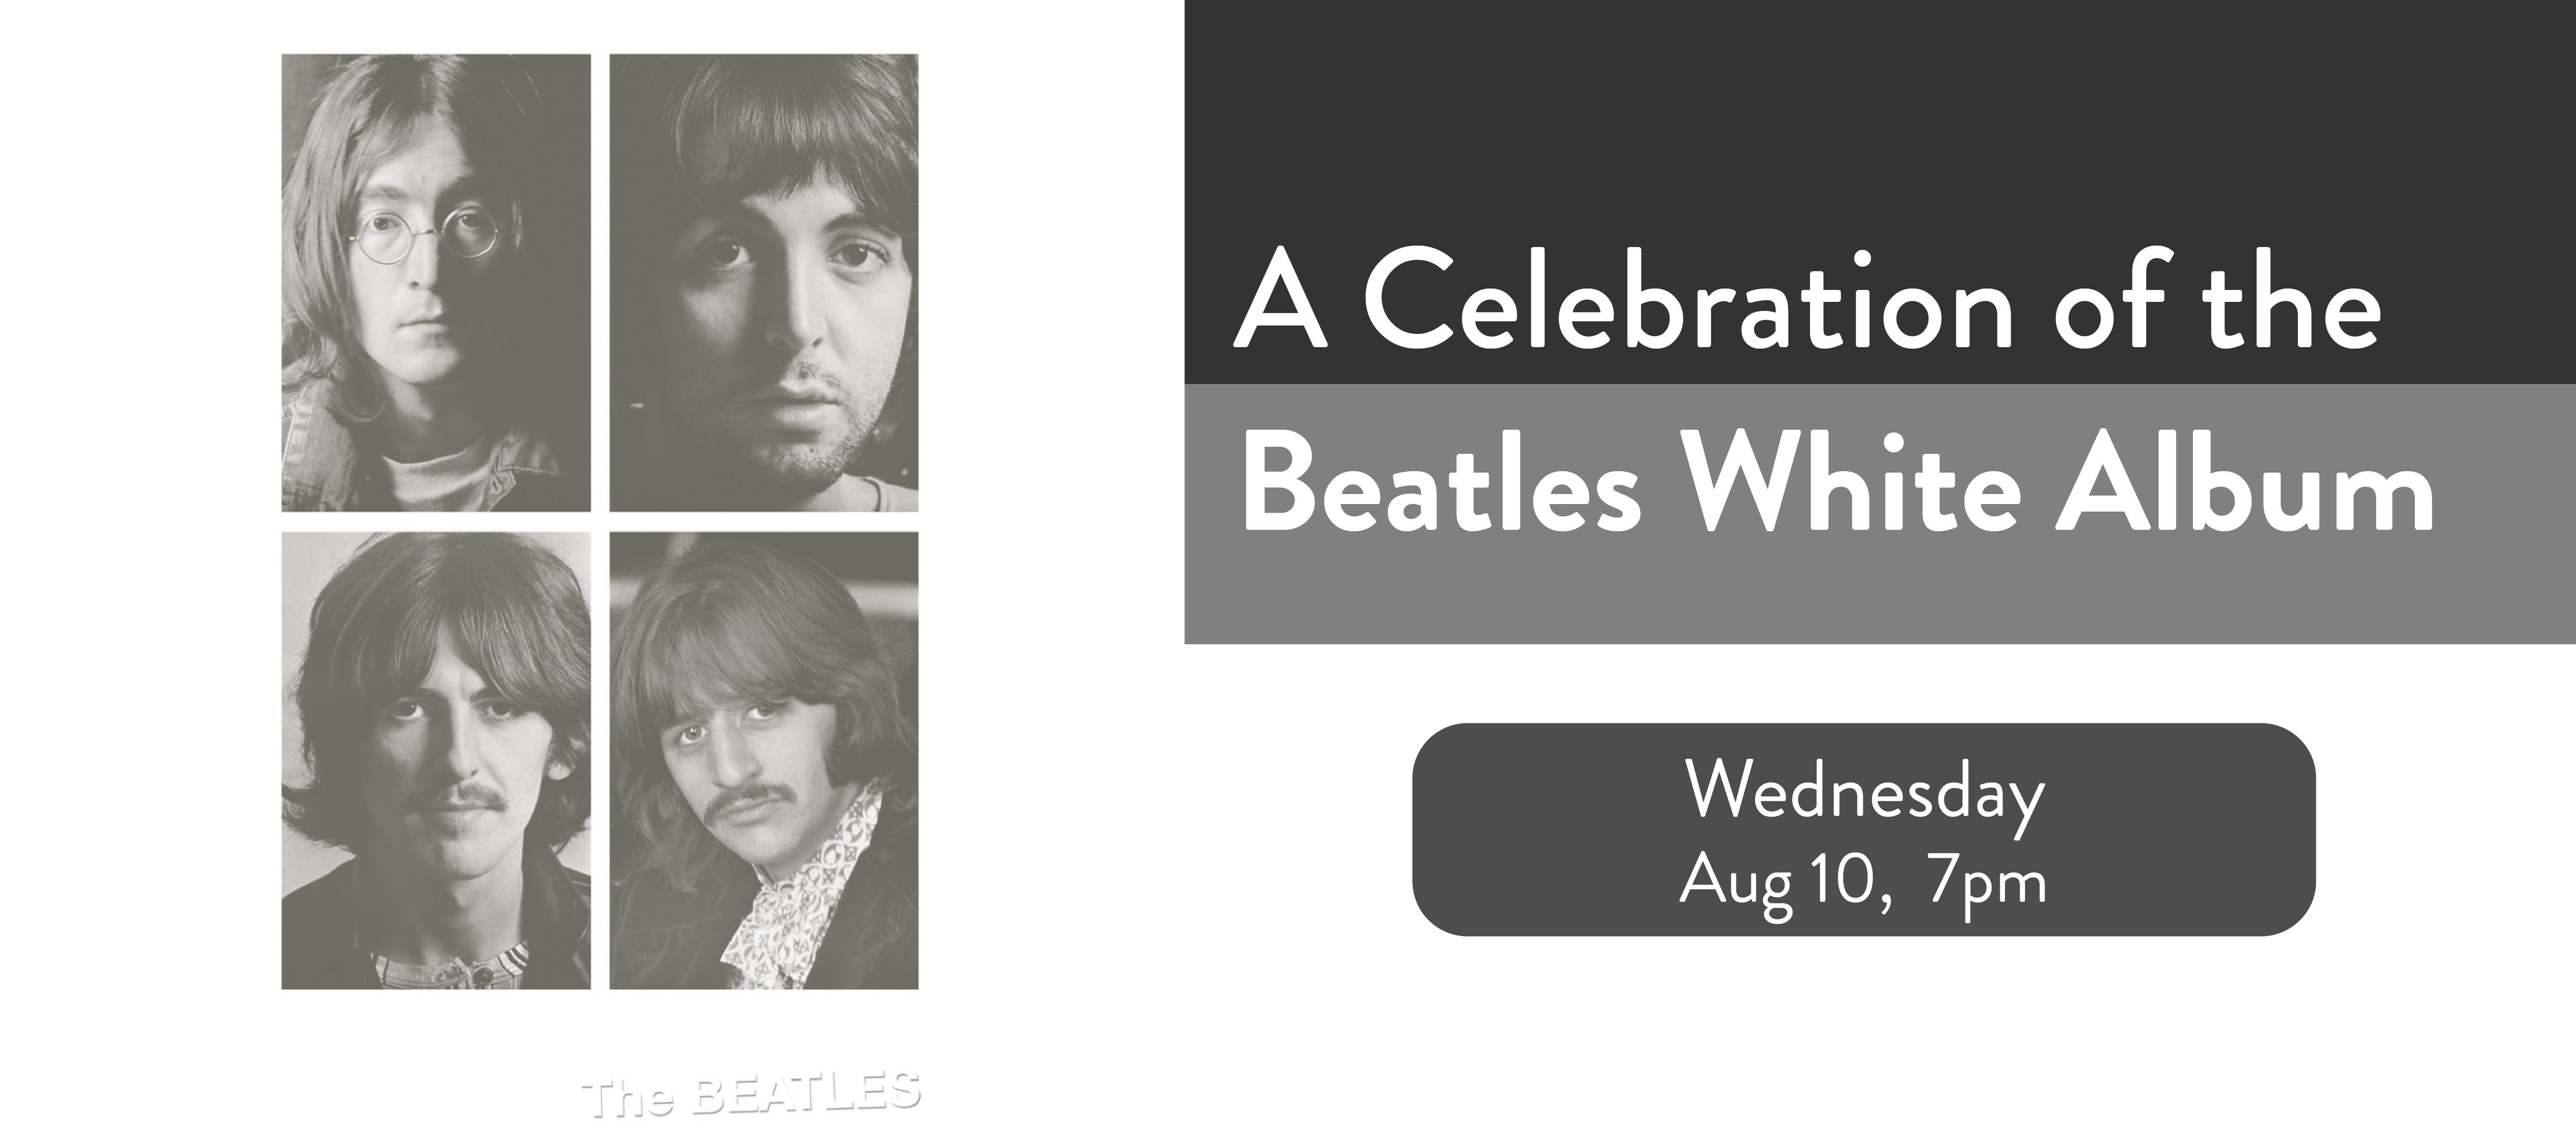 prospect heights library, phpl, beatles, white album